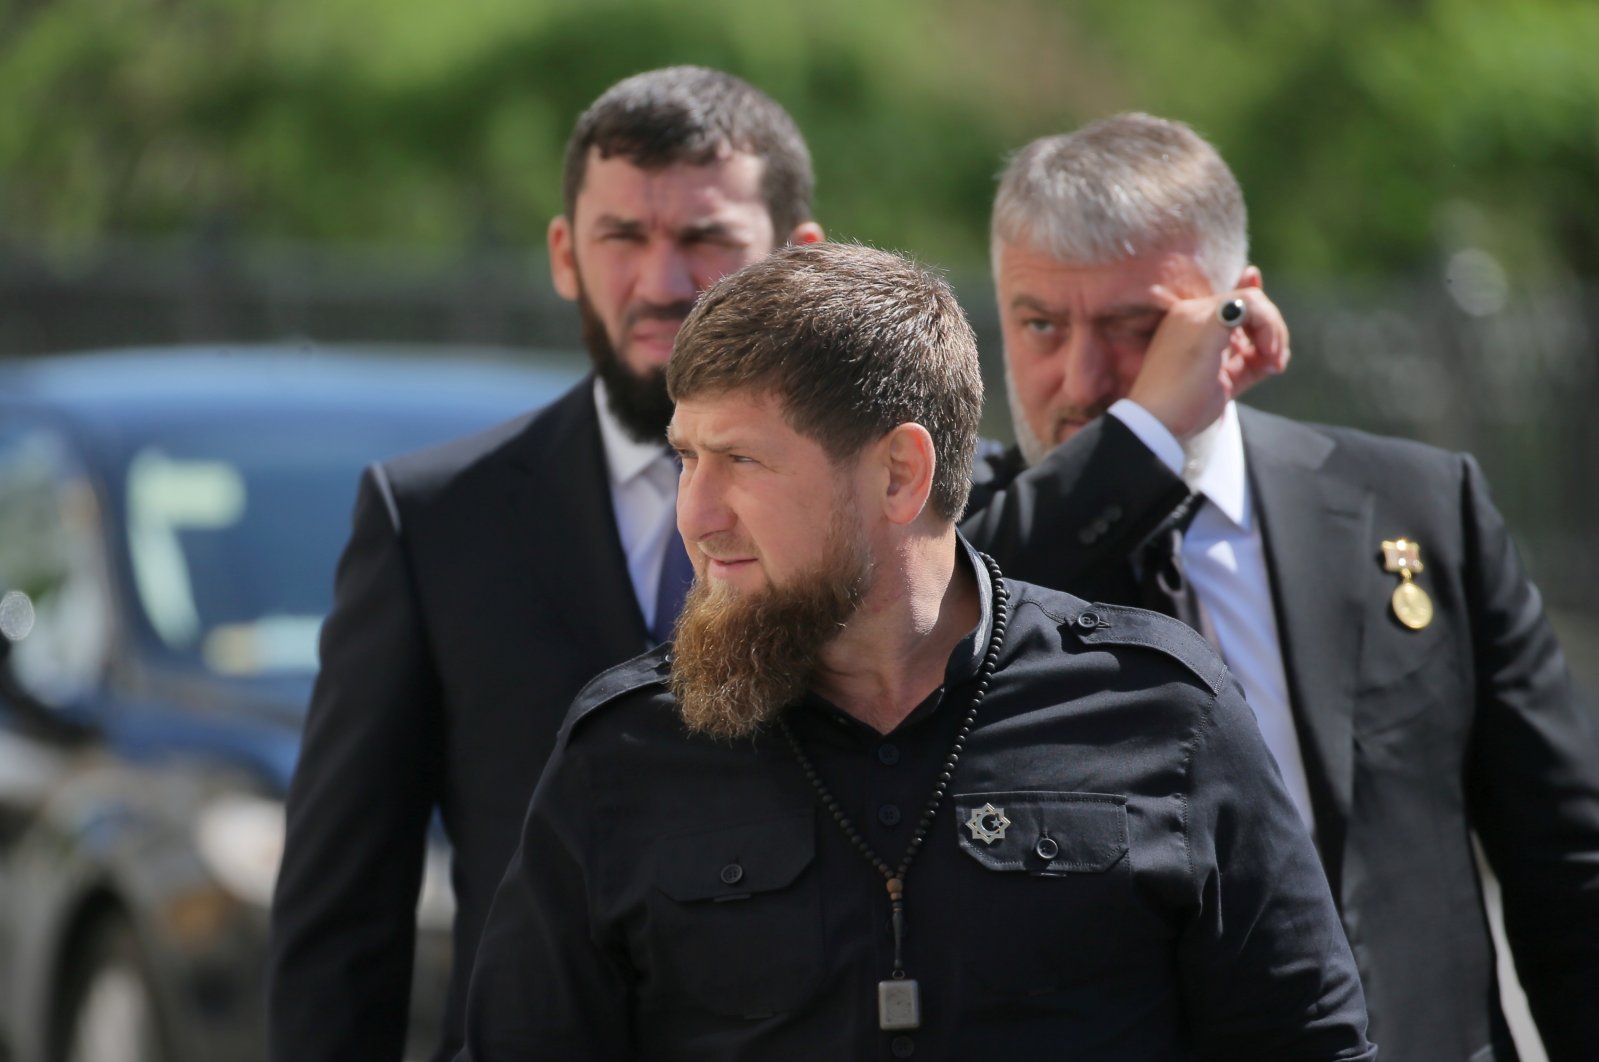 Head of the Chechen Republic Ramzan Kadyrov (front) walks before a ceremony inaugurating Vladimir Putin as president of Russia at the Kremlin in Moscow, Russia, May 7, 2018. (Reuters File Photo)